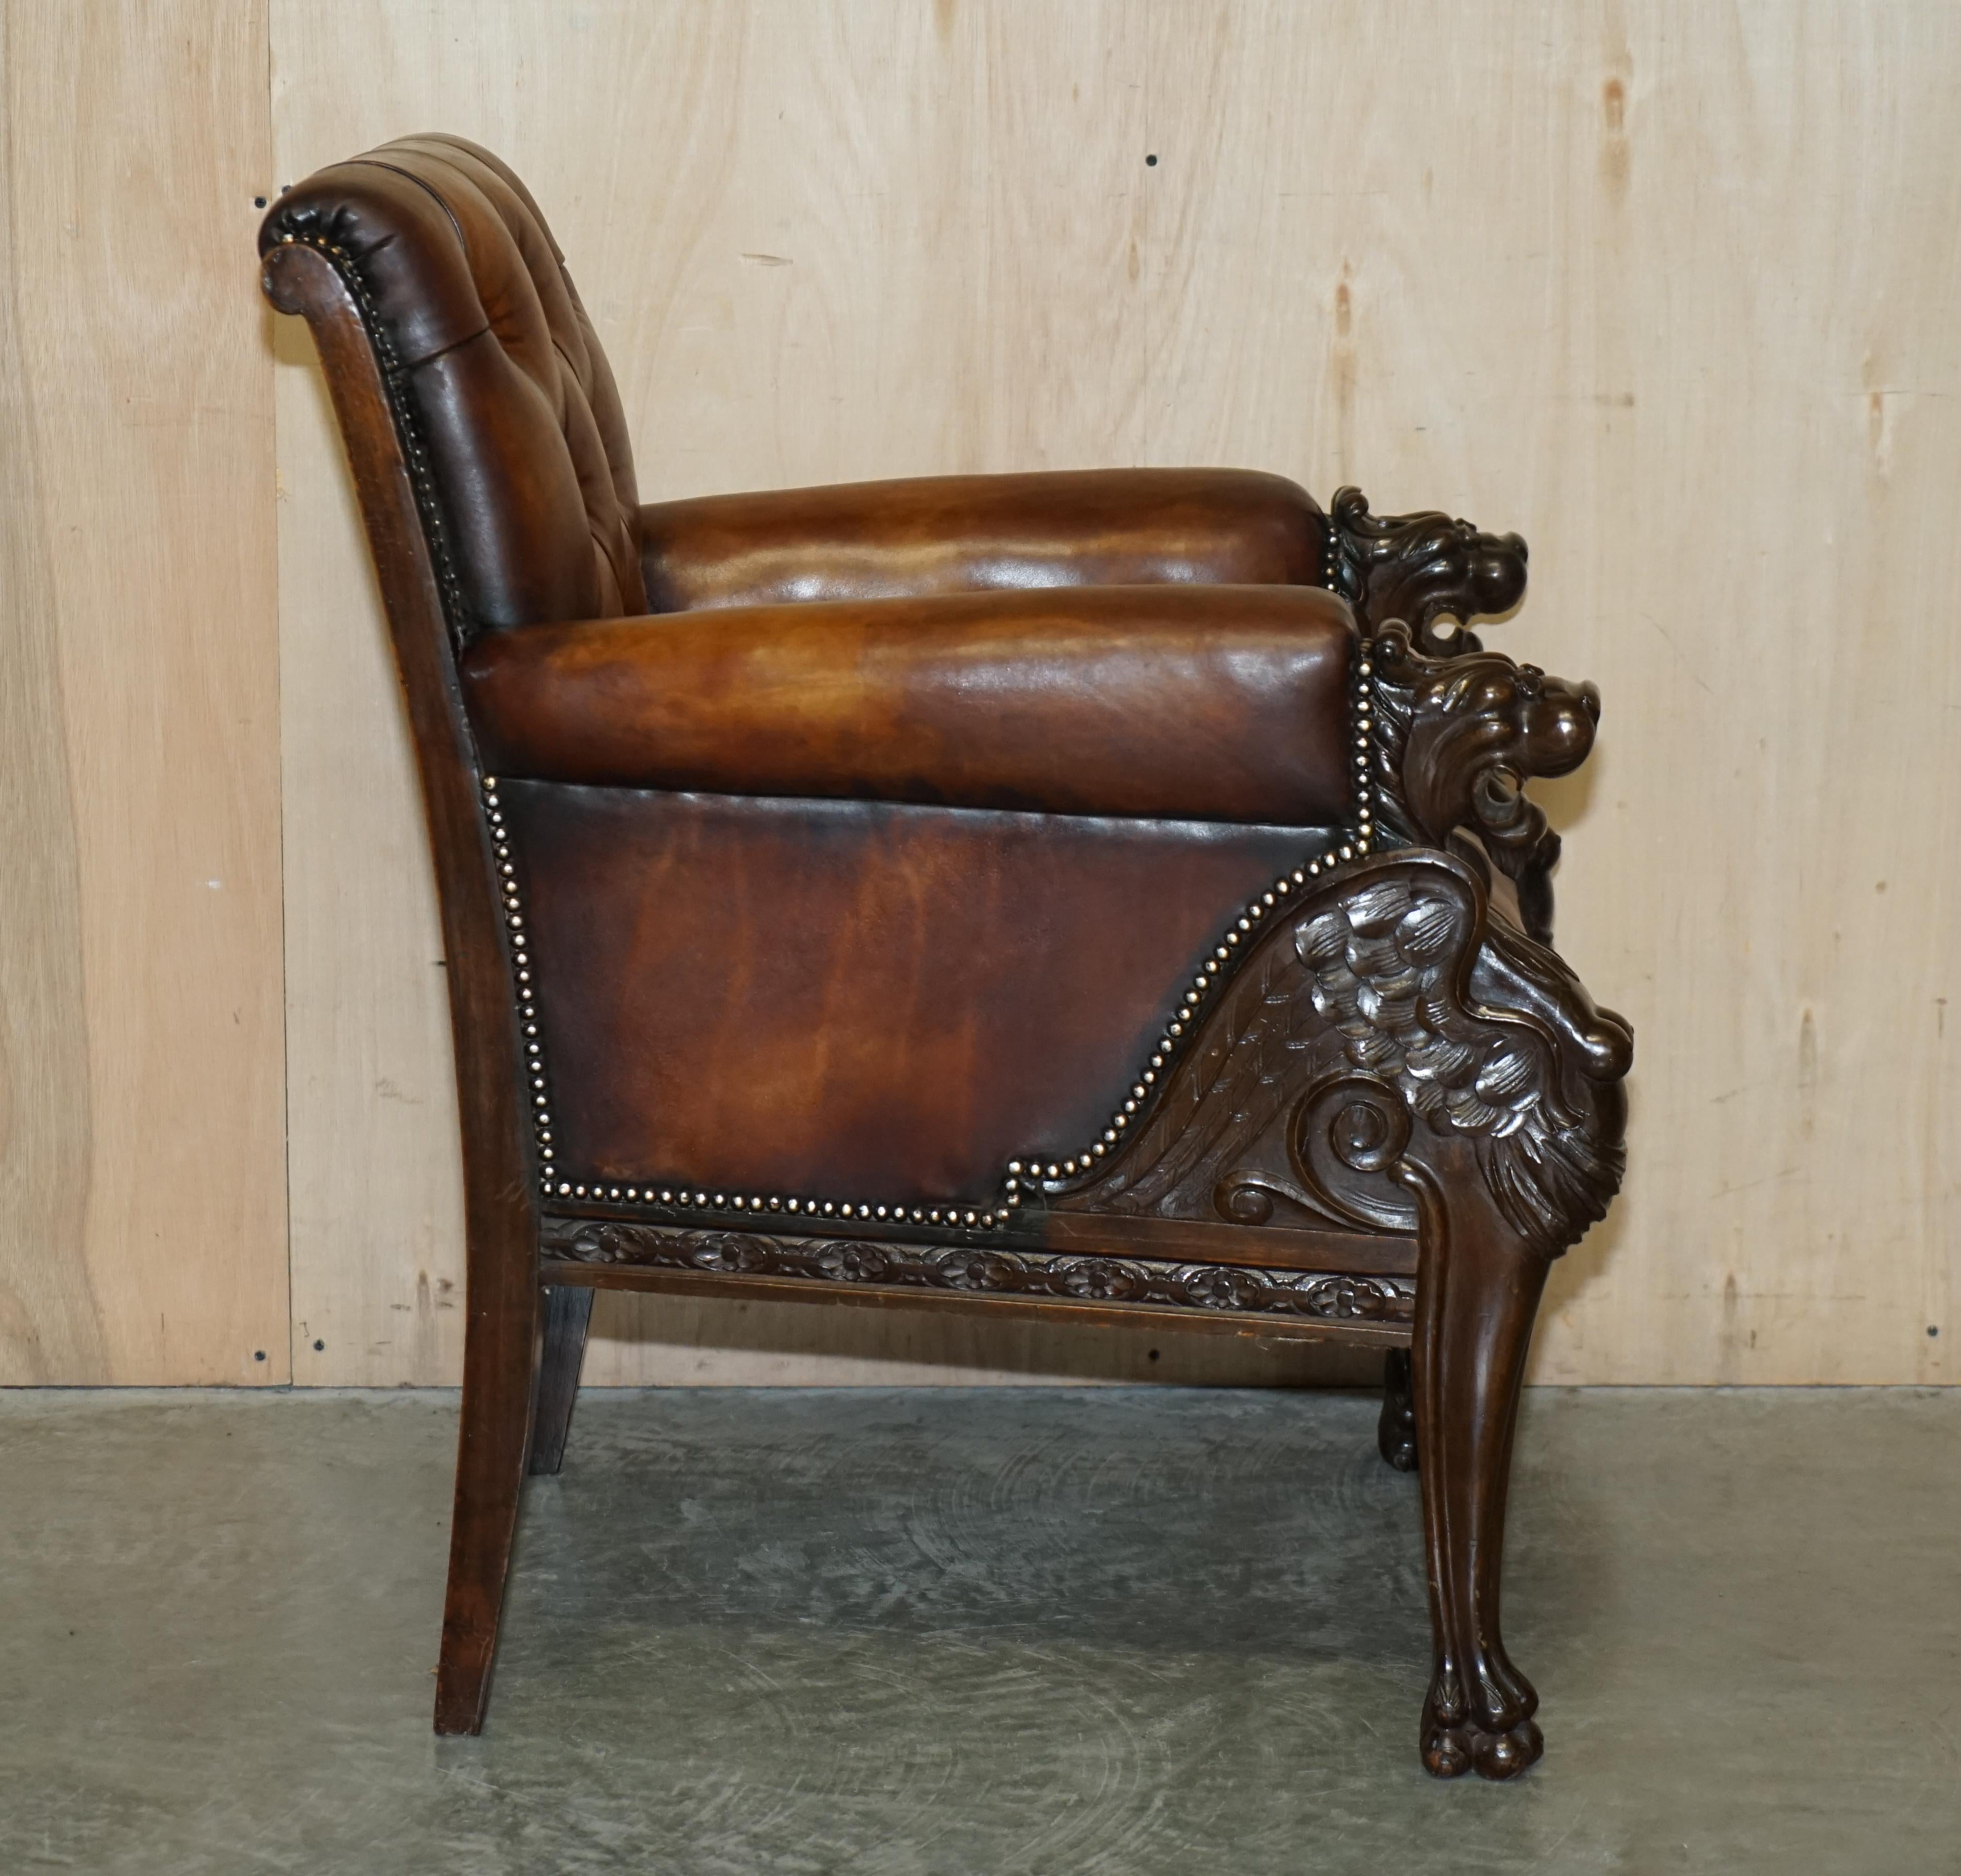 Restored Antique Lion Hand Carved Brown Leather Chesterfield Sofa Armchair Suite For Sale 13